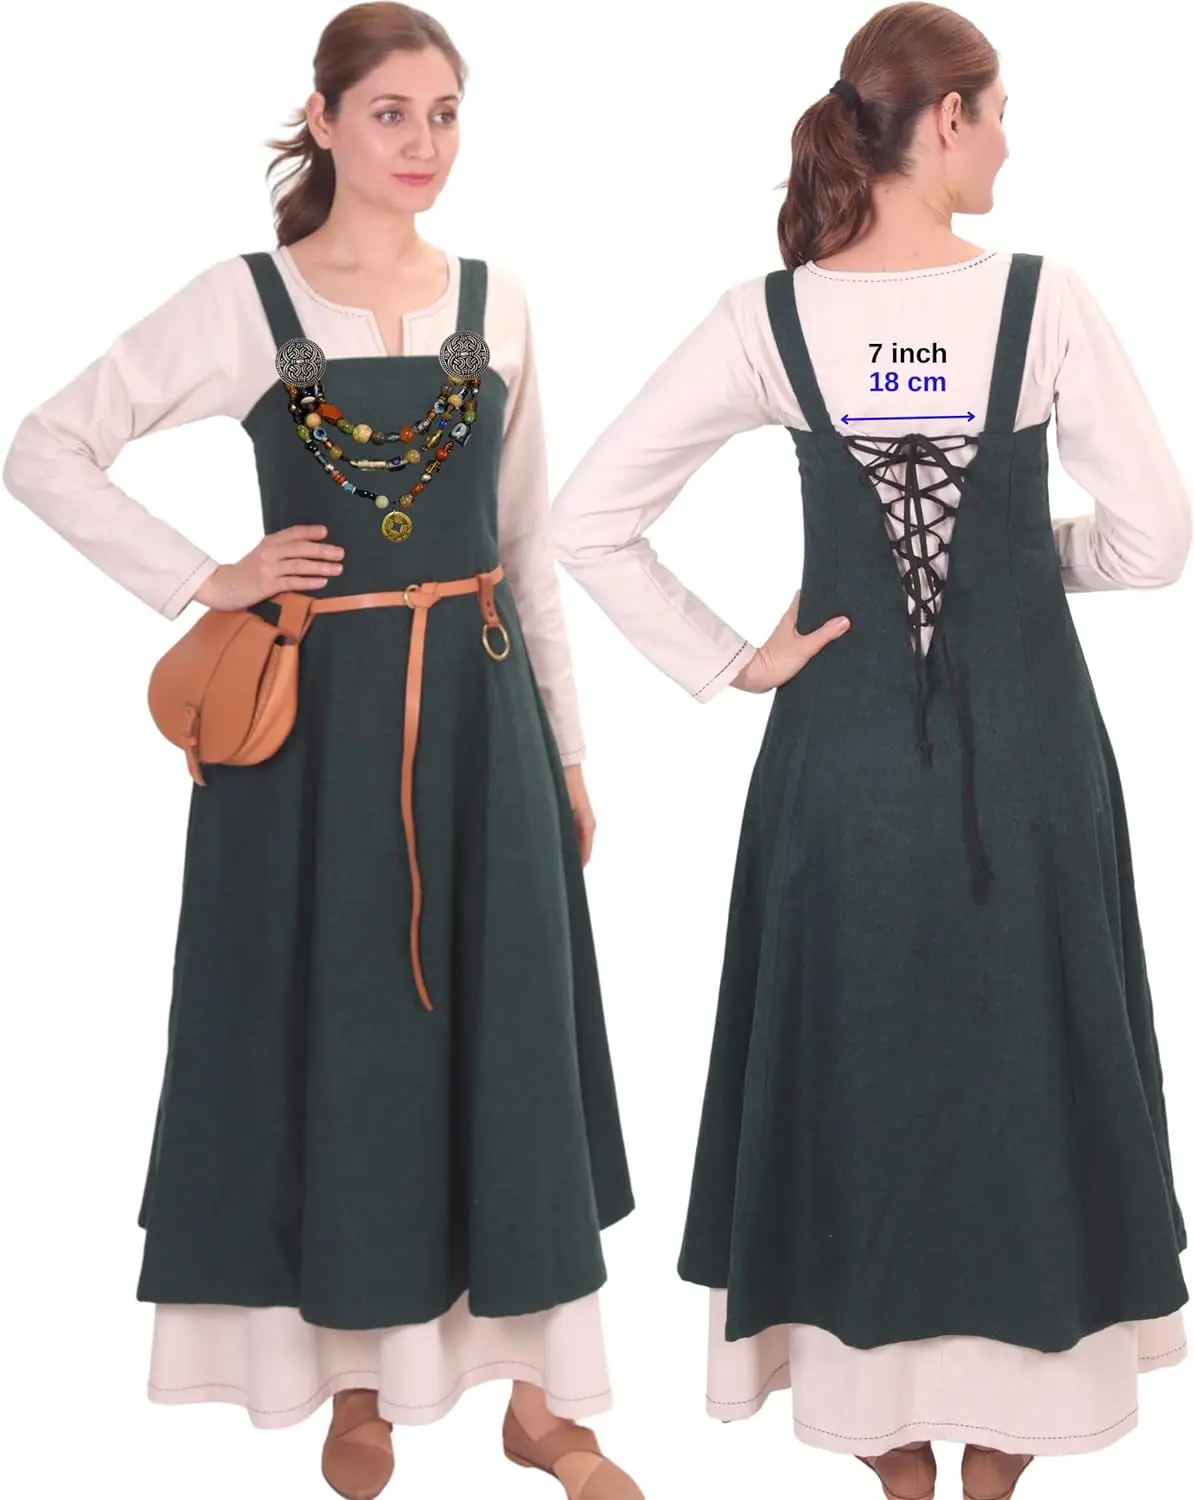 

Two Piece Set Medieval Viking Apron Overdress with Laced Medieval Classic Vintage Retro Vogue Flare Sleeve Tunic Dress Ladies